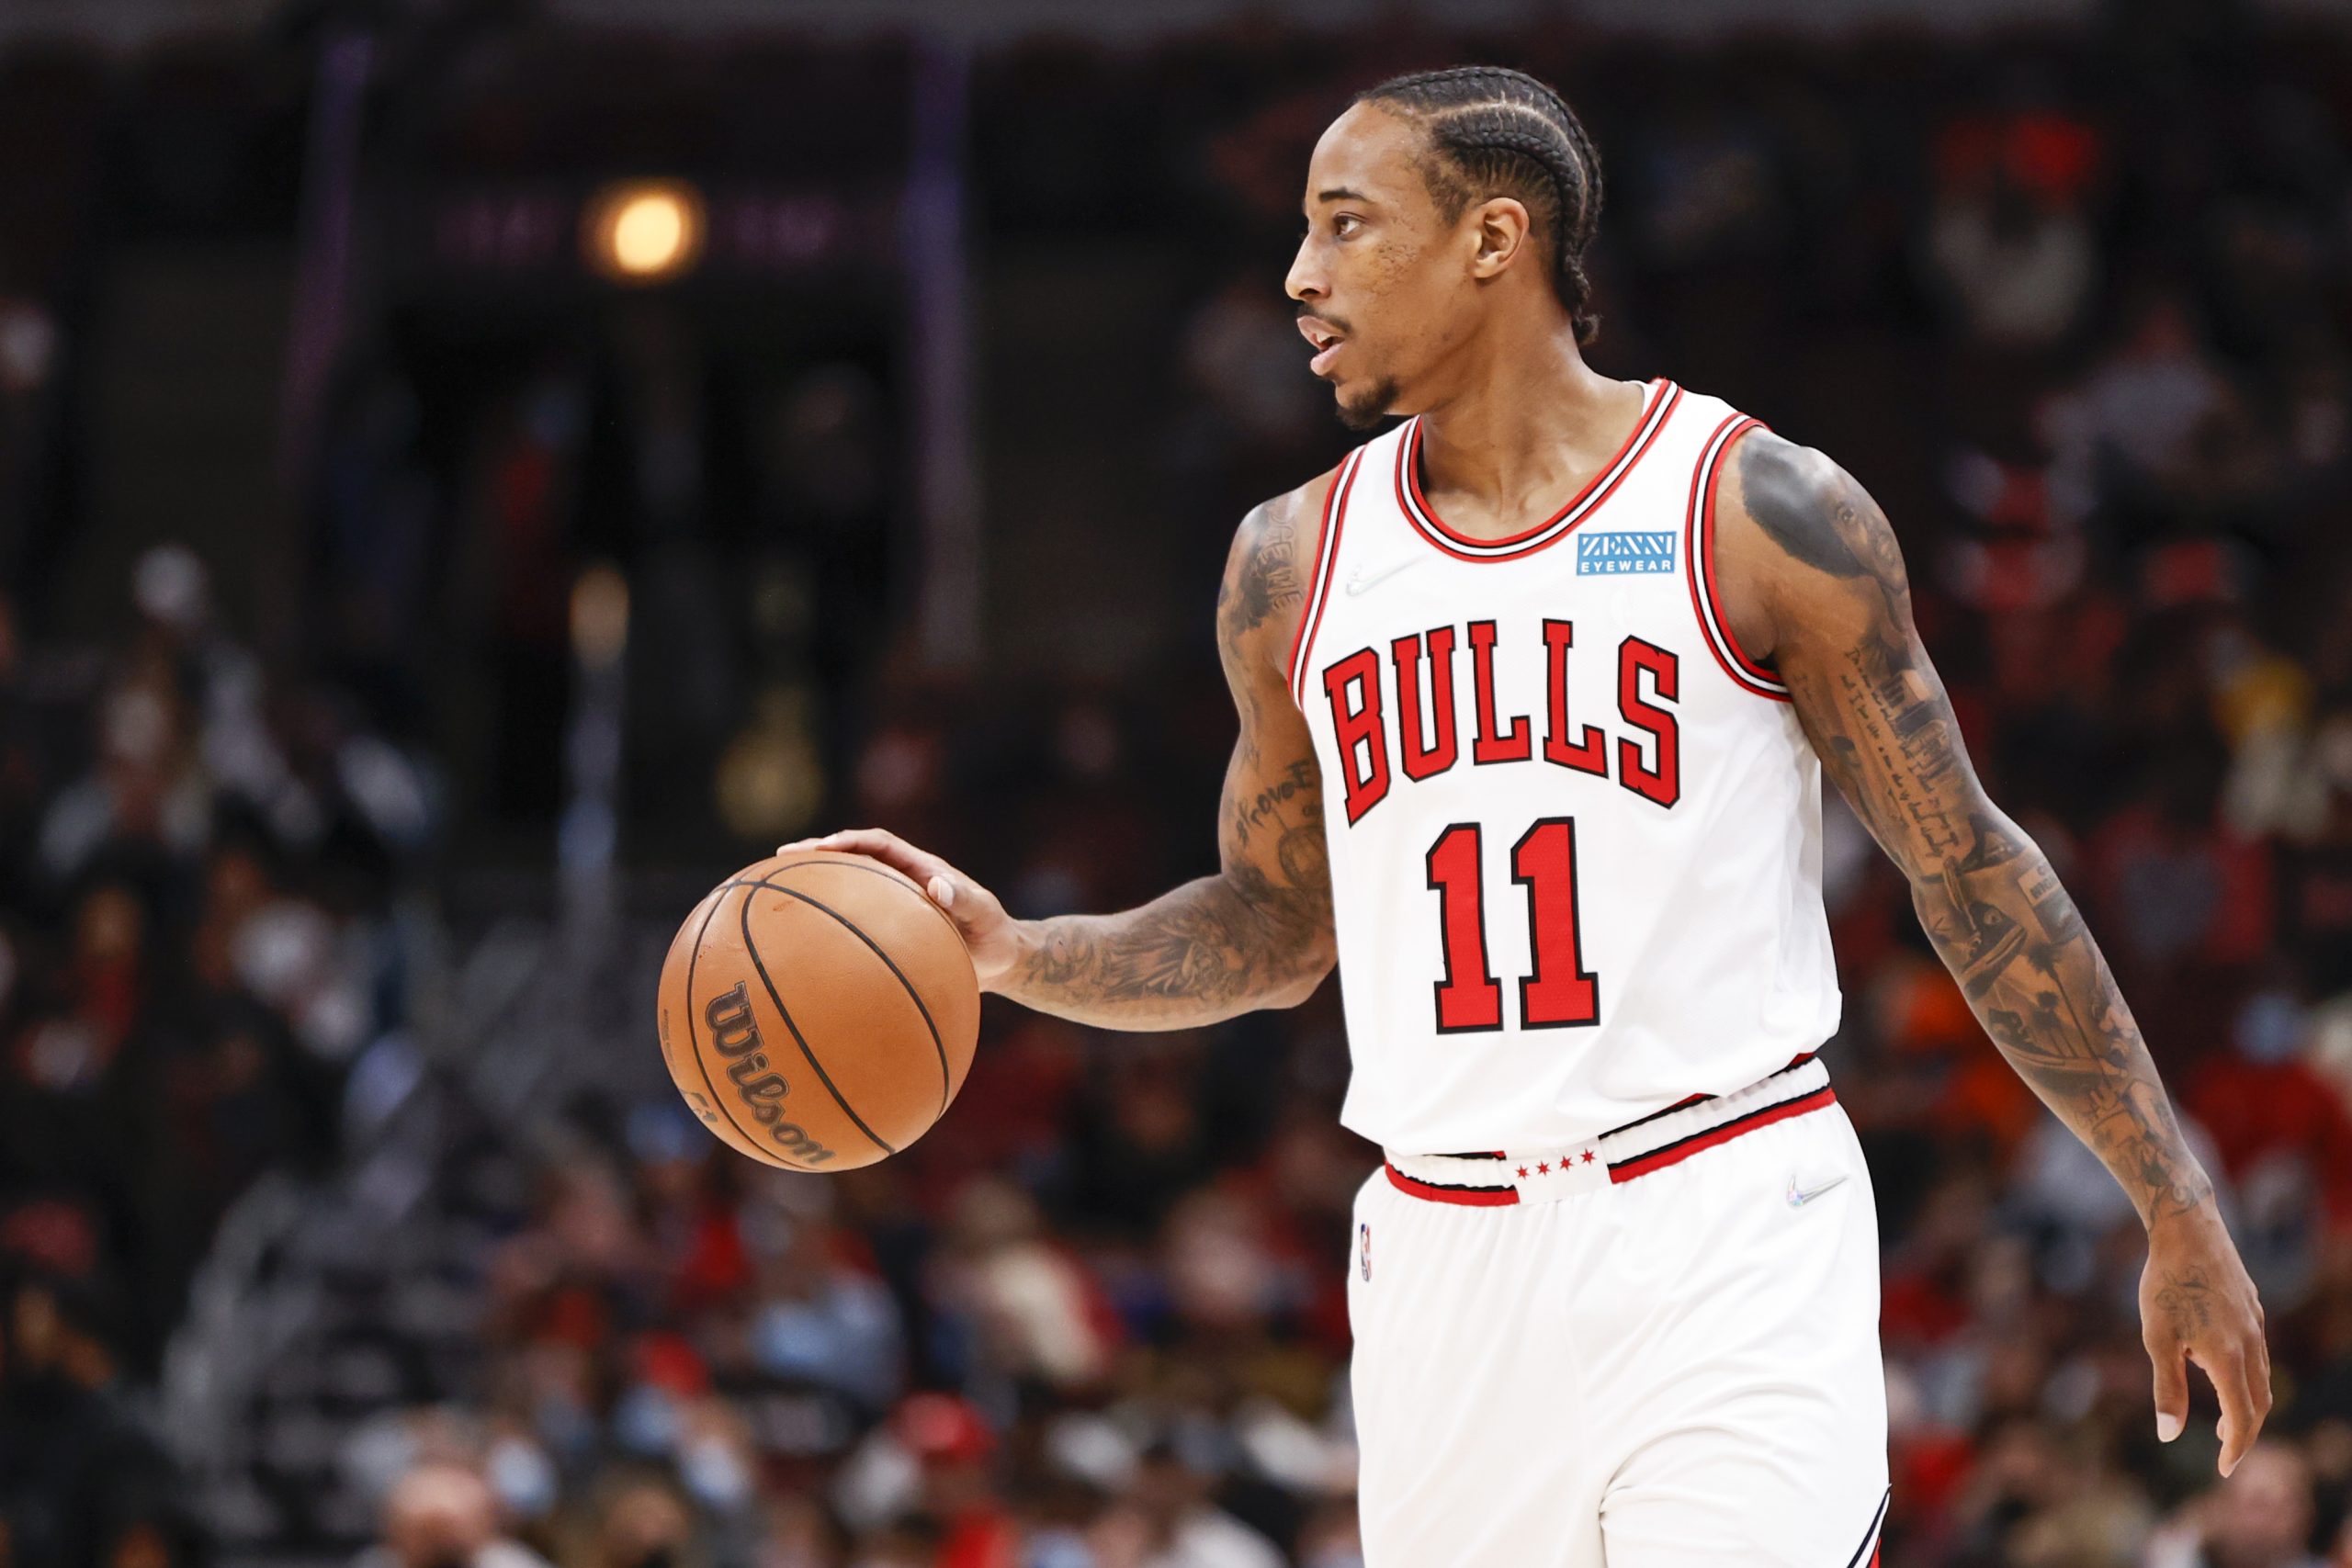 Nov 6, 2021; Chicago, Illinois, USA; Chicago Bulls forward DeMar DeRozan (11) brings the ball up court against the Philadelphia 76ers during the first half at United Center. Mandatory Credit: Kamil Krzaczynski-USA TODAY Sports